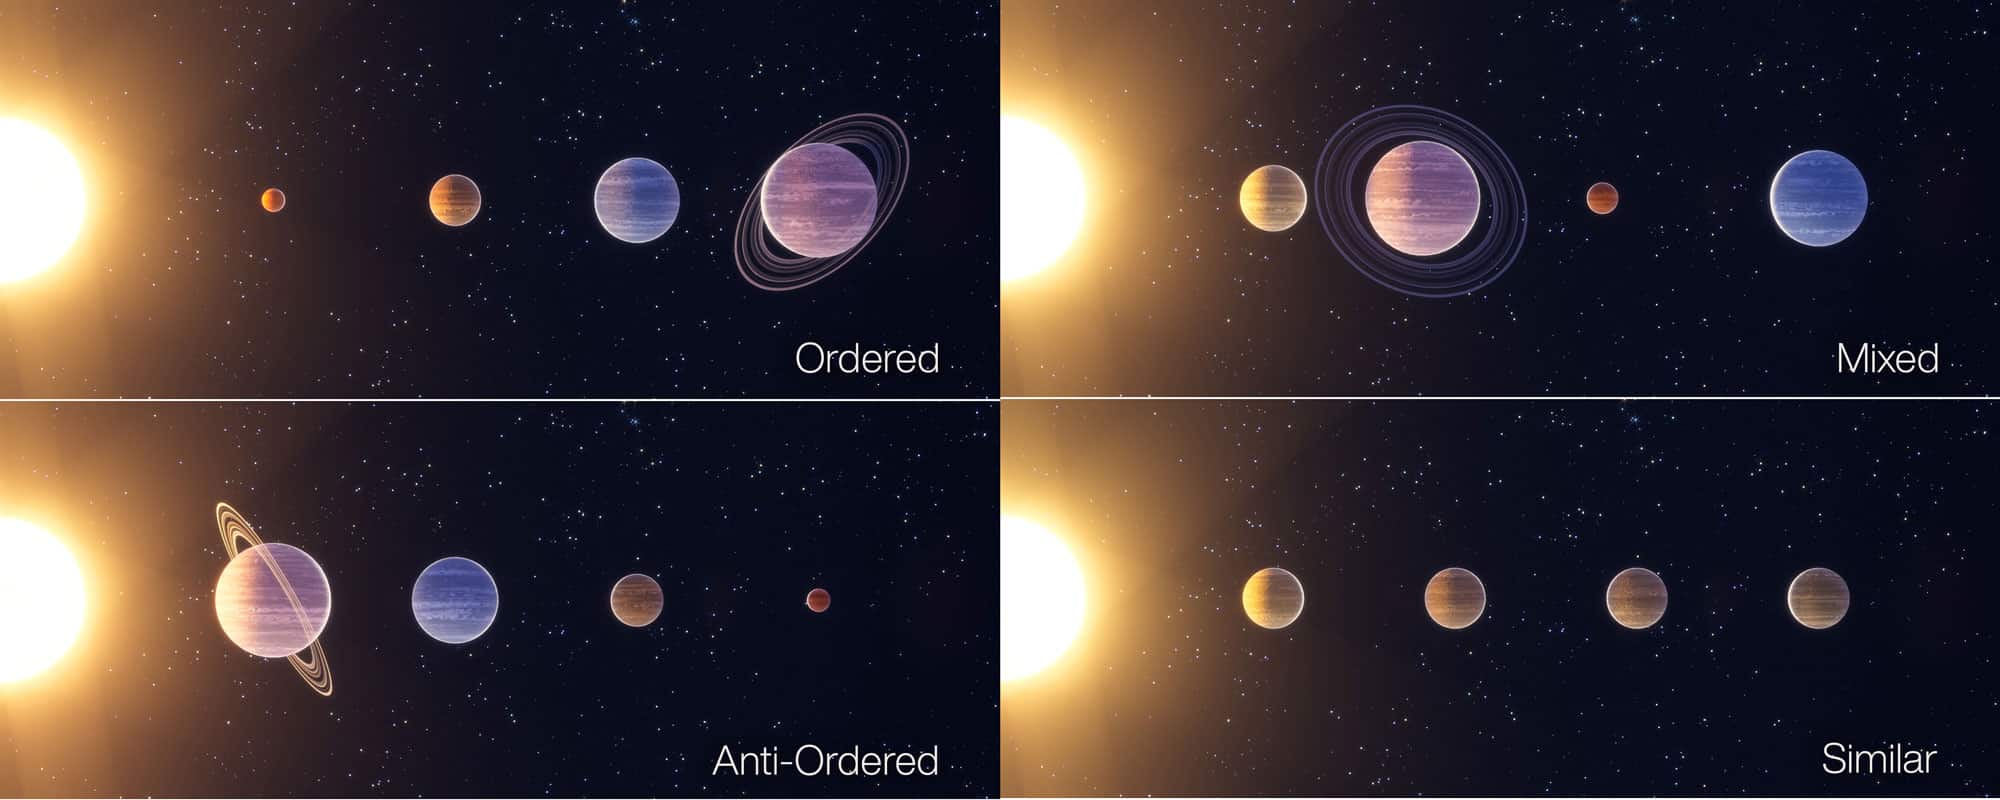 four classes of planetary system architecture